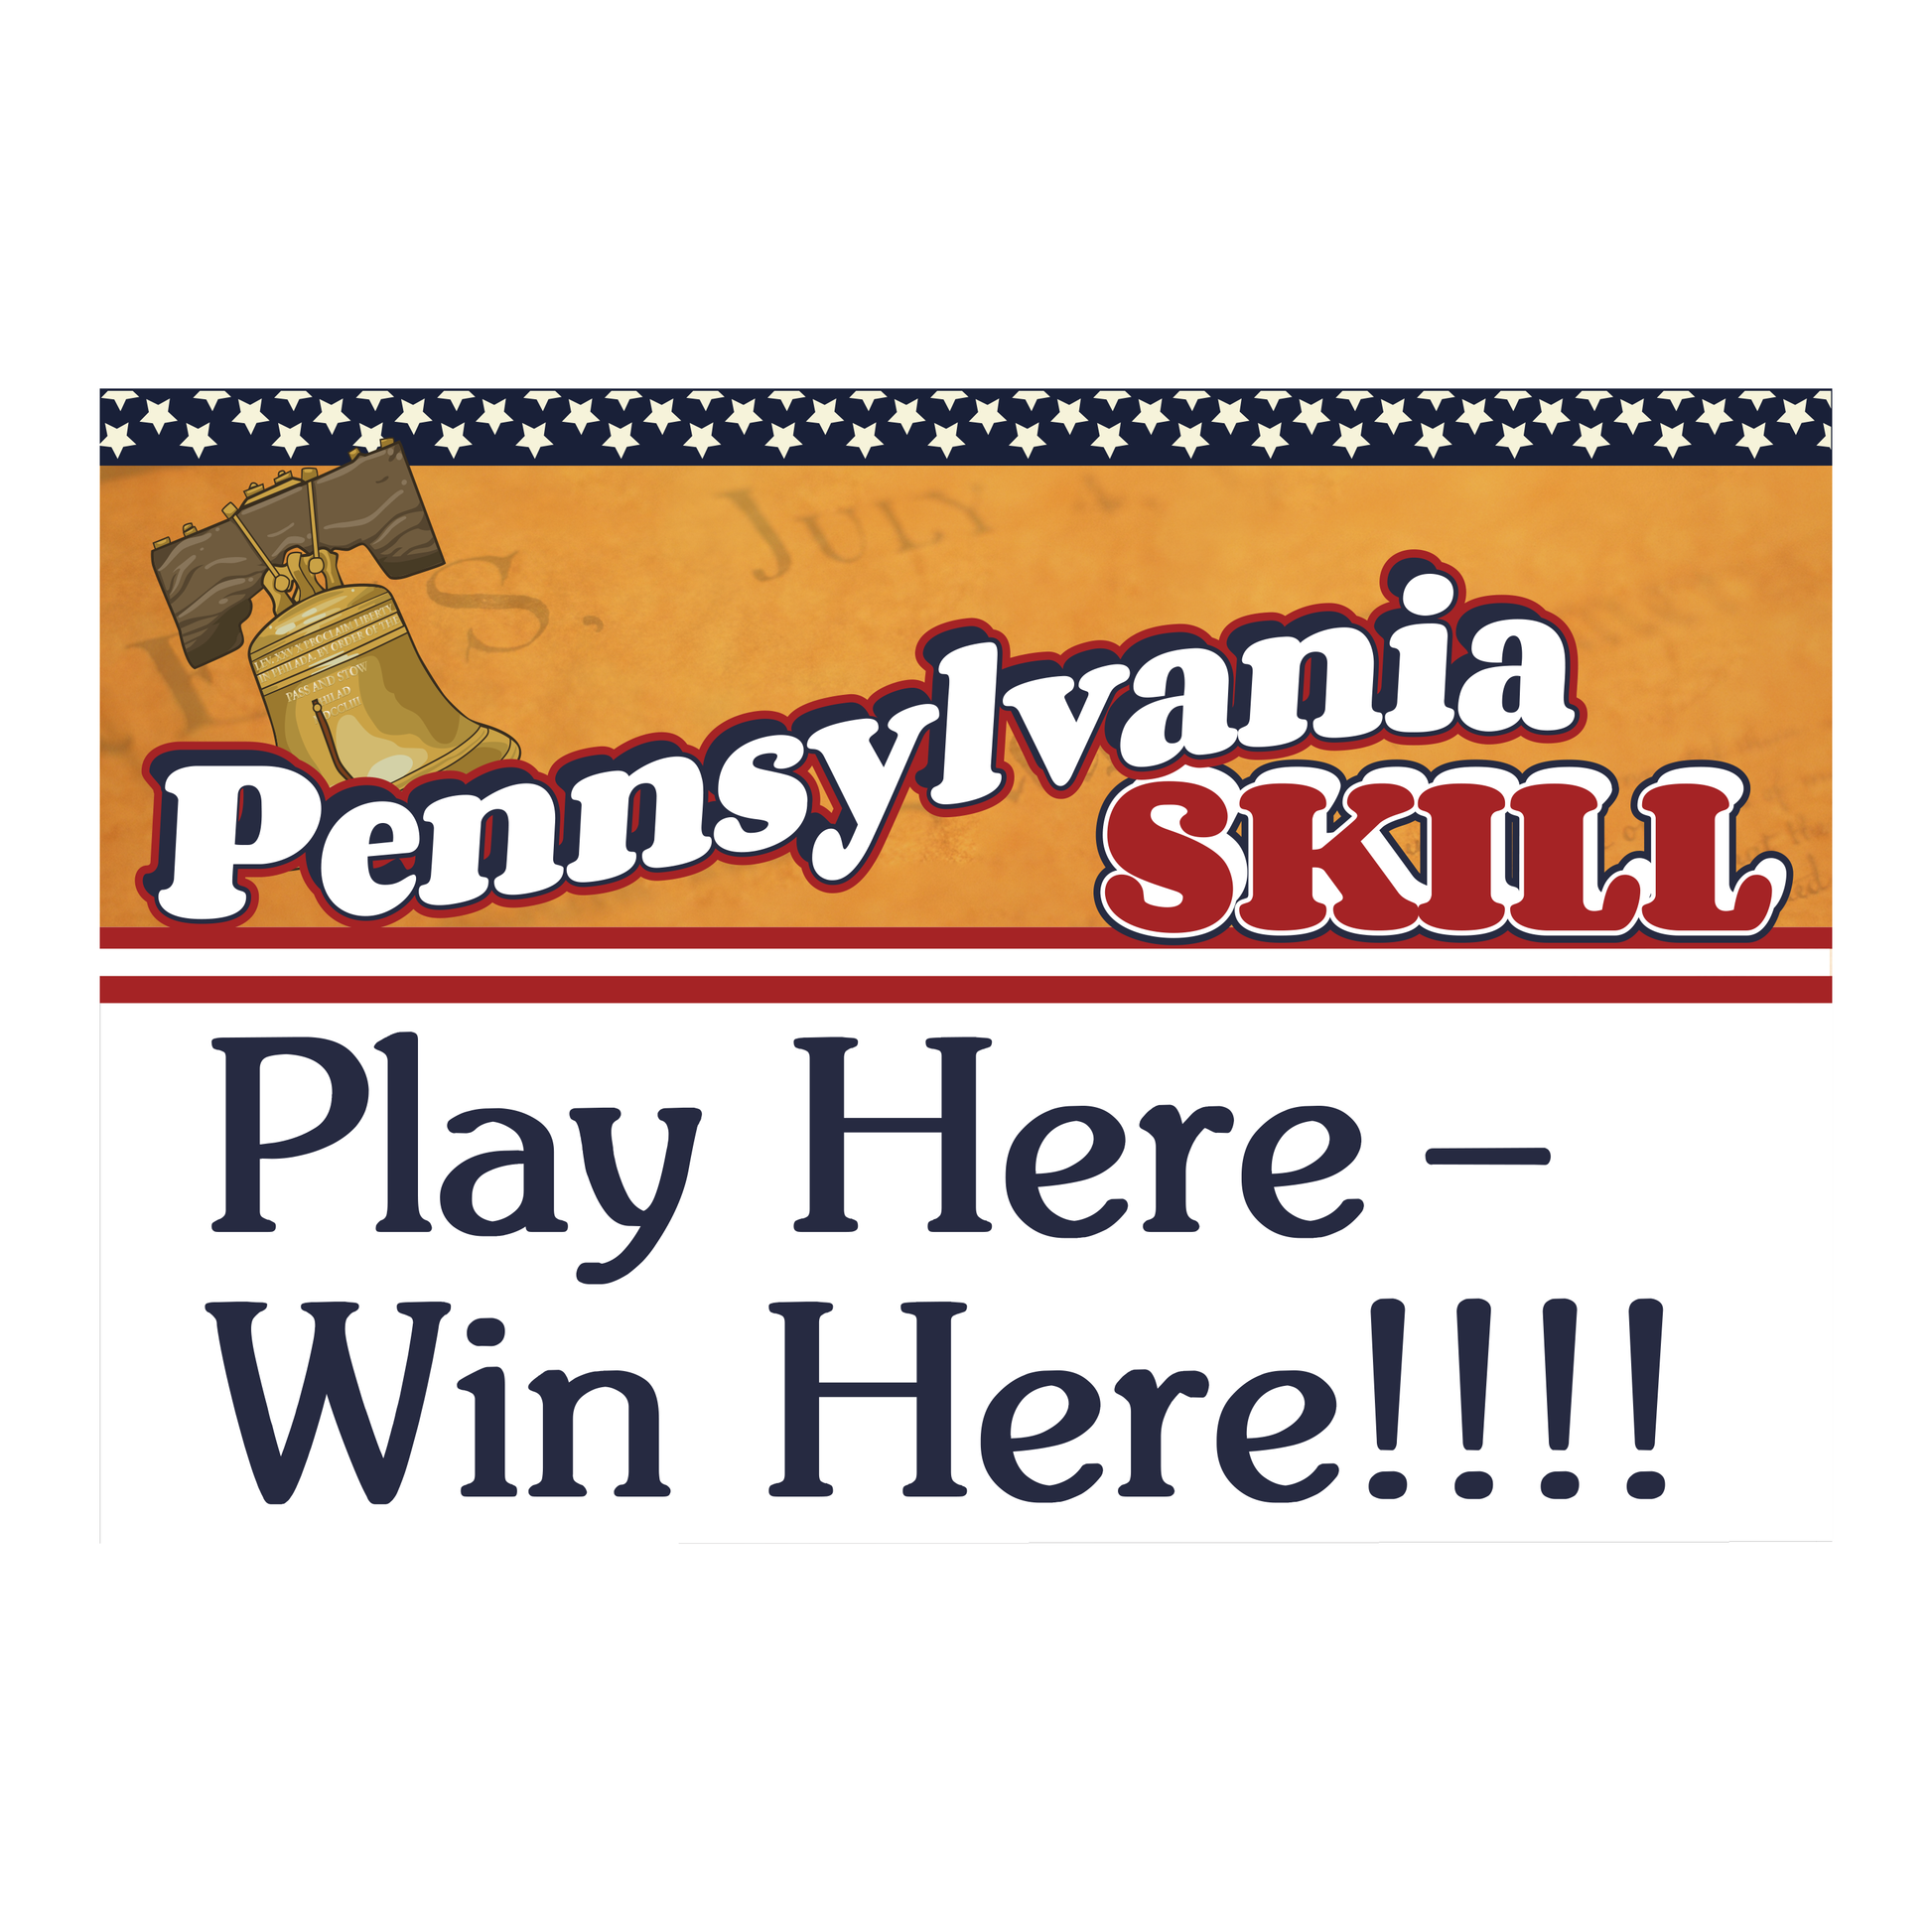 Promote your Pennsylvania Skill games with a "Play Here/Win Here" Yard Sign to market your location to the public. Printed and designed by Fastsigns of Muncy. Sold by Miele Manufacturing.